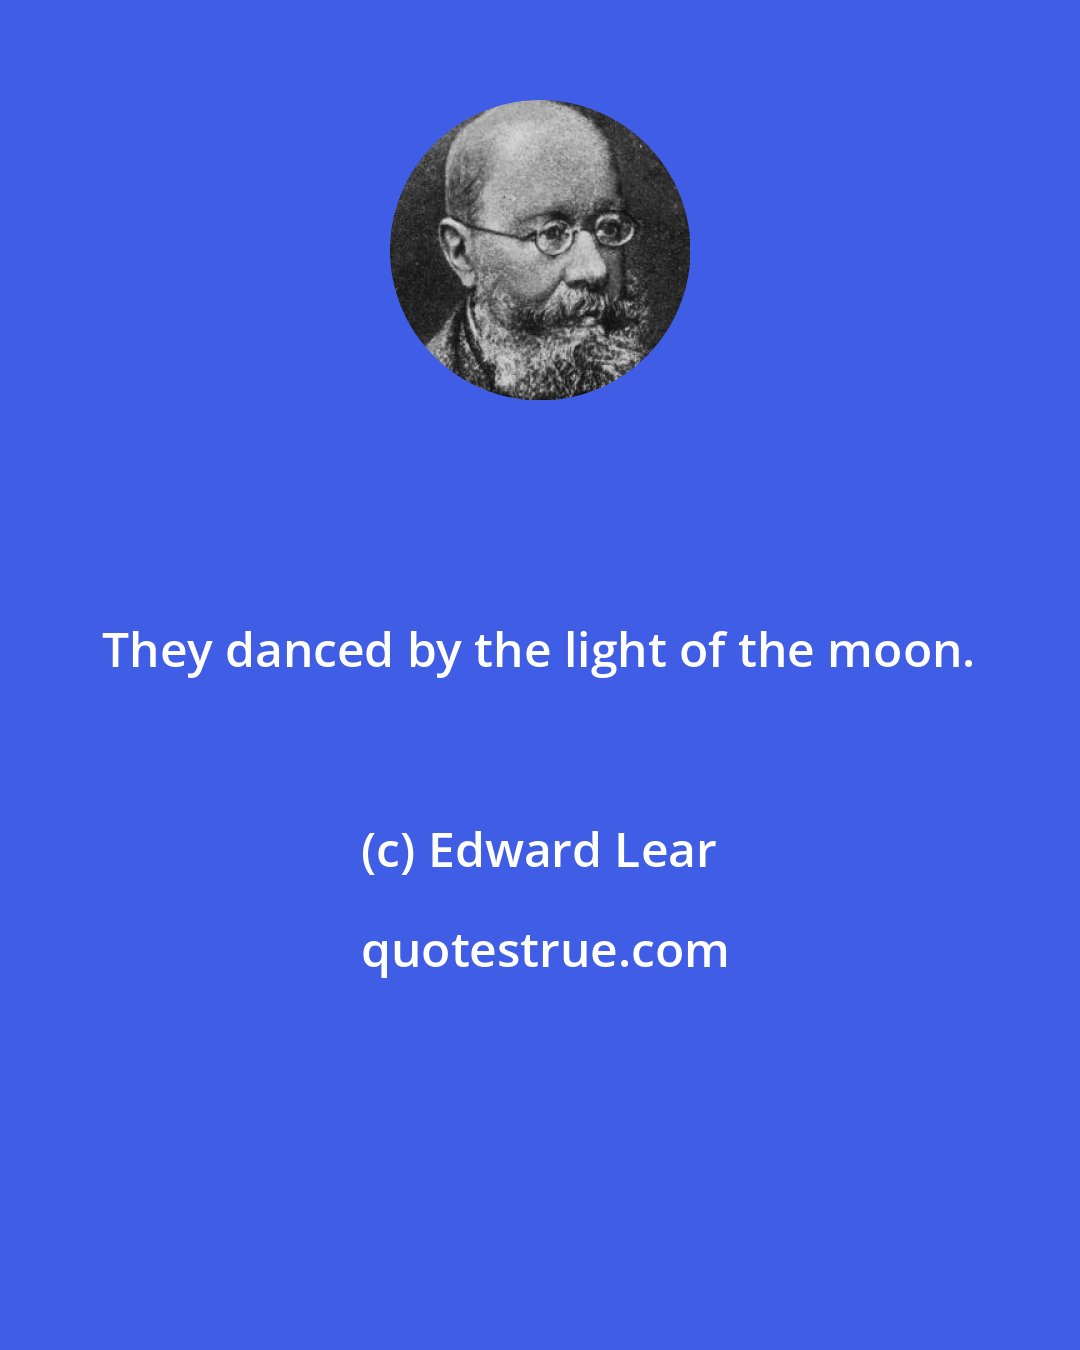 Edward Lear: They danced by the light of the moon.